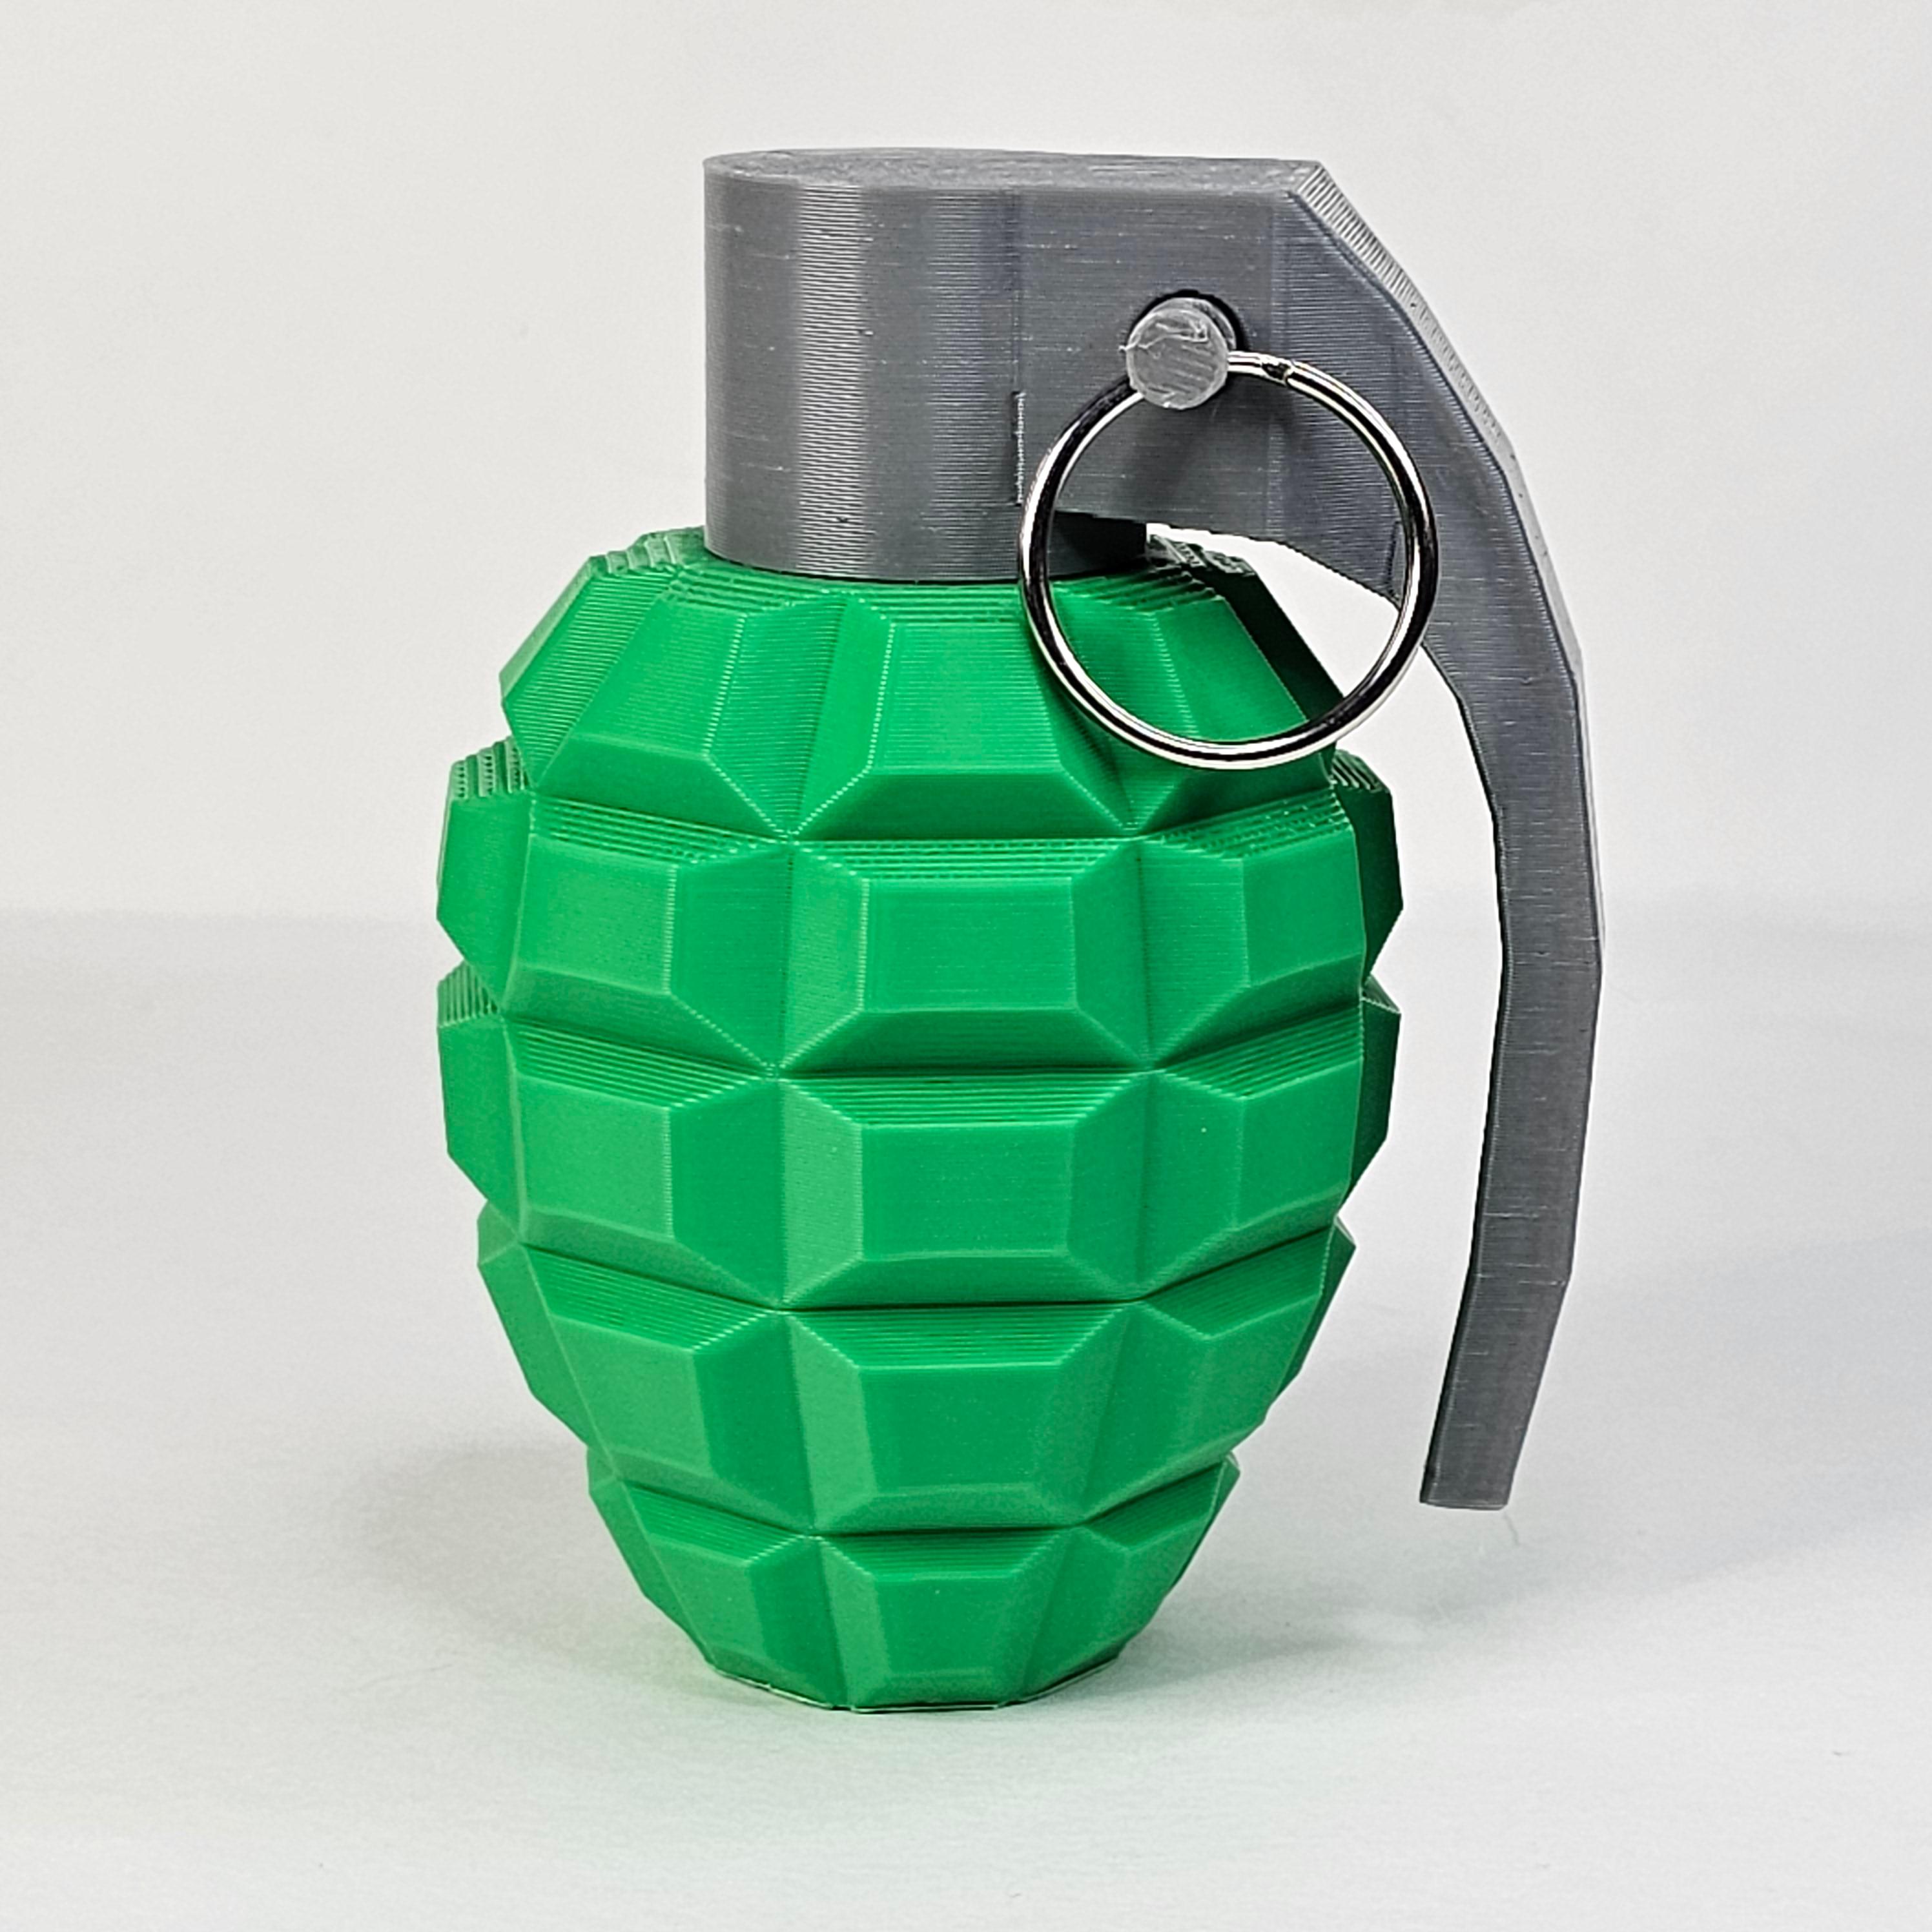 GRENADE PROP - NO SUPPORTS - EASY-TO-USE 3d model